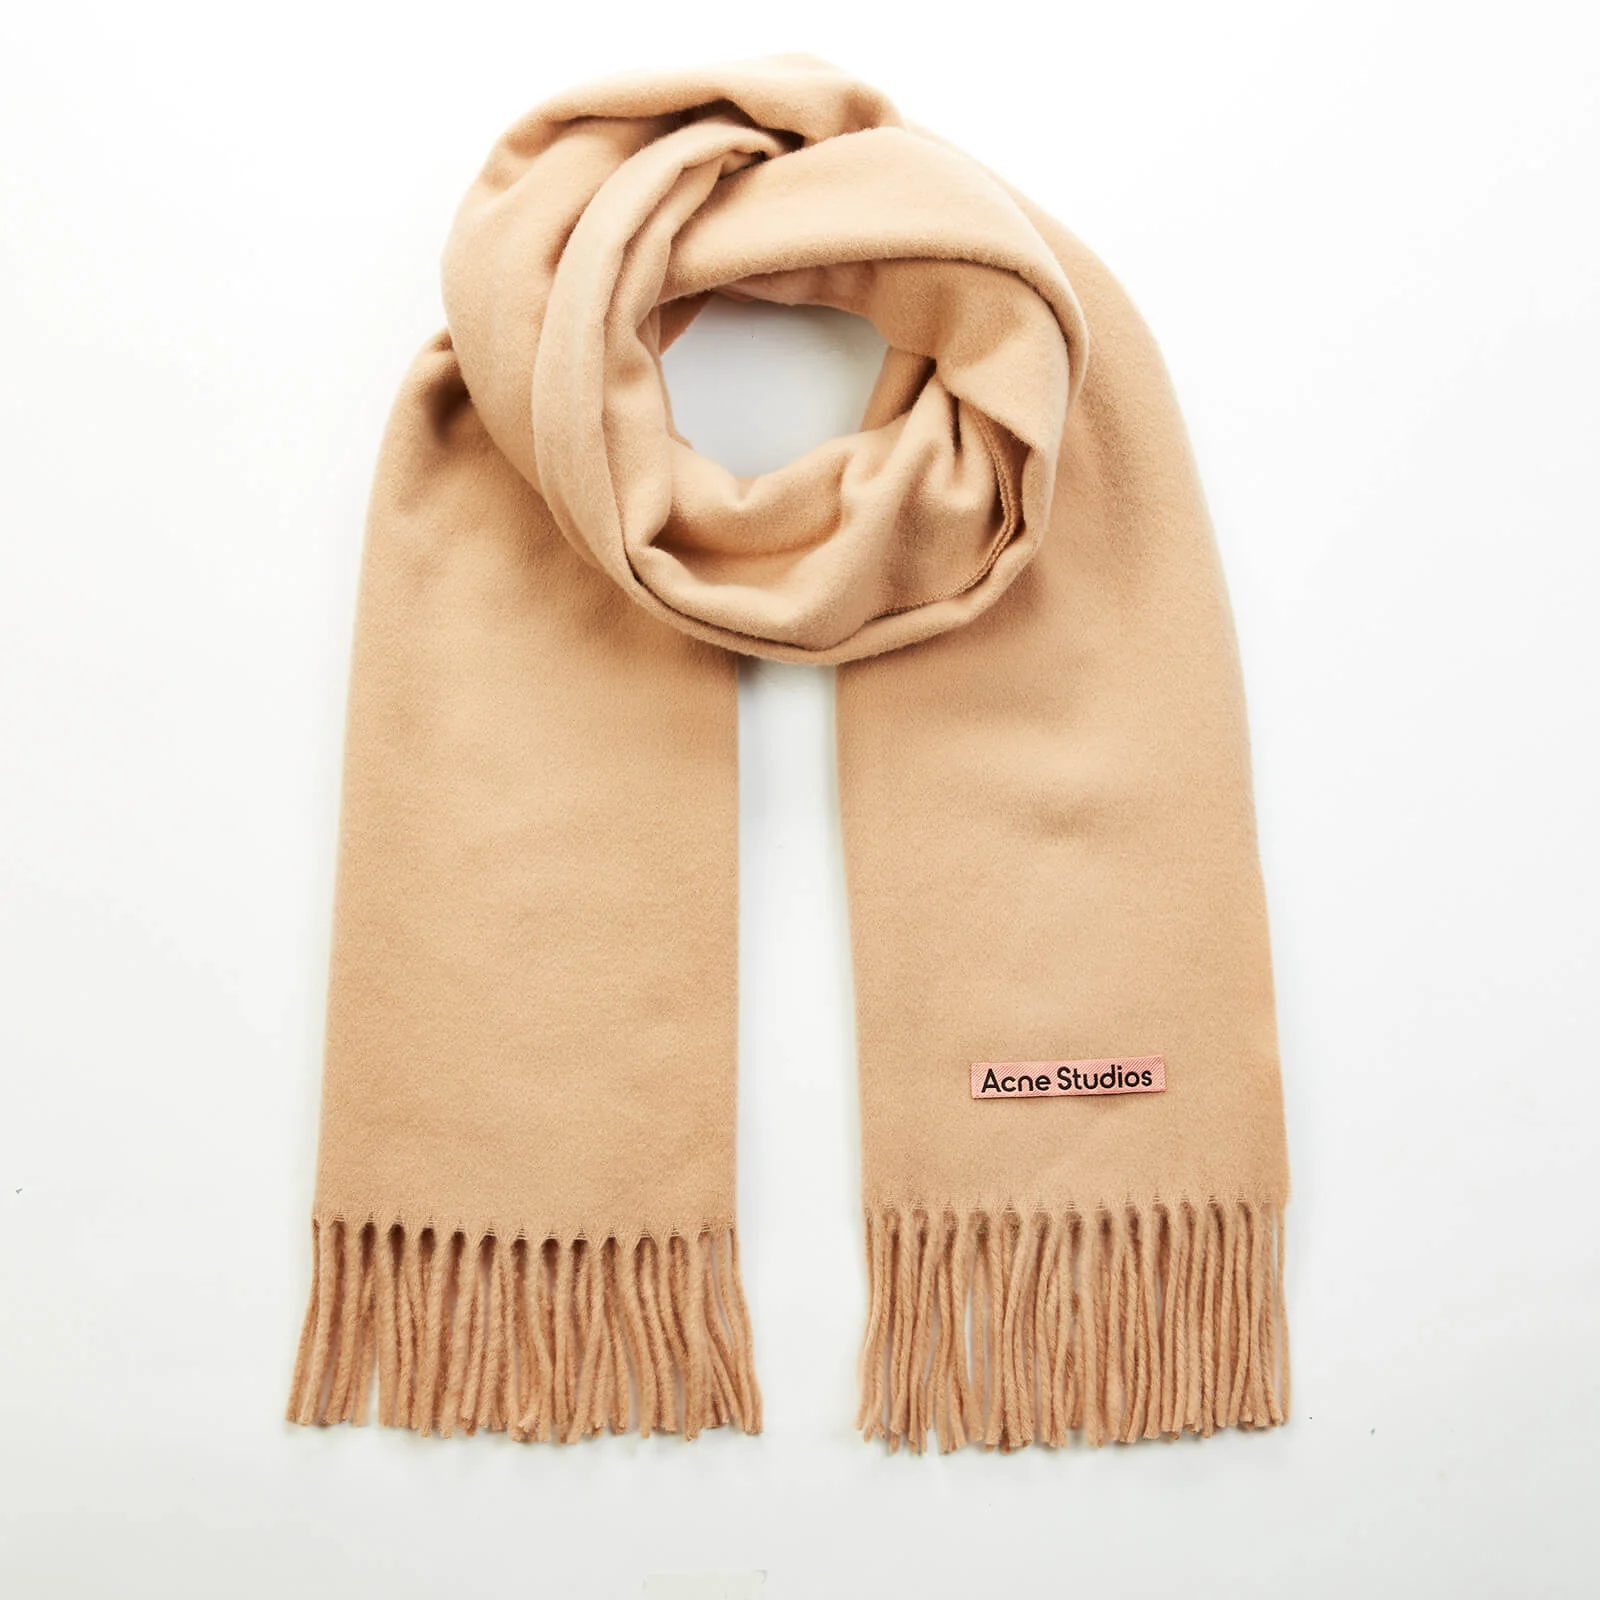 Acne Studios Canada New Oversized Wool Scarf - Camel Brown Image 1